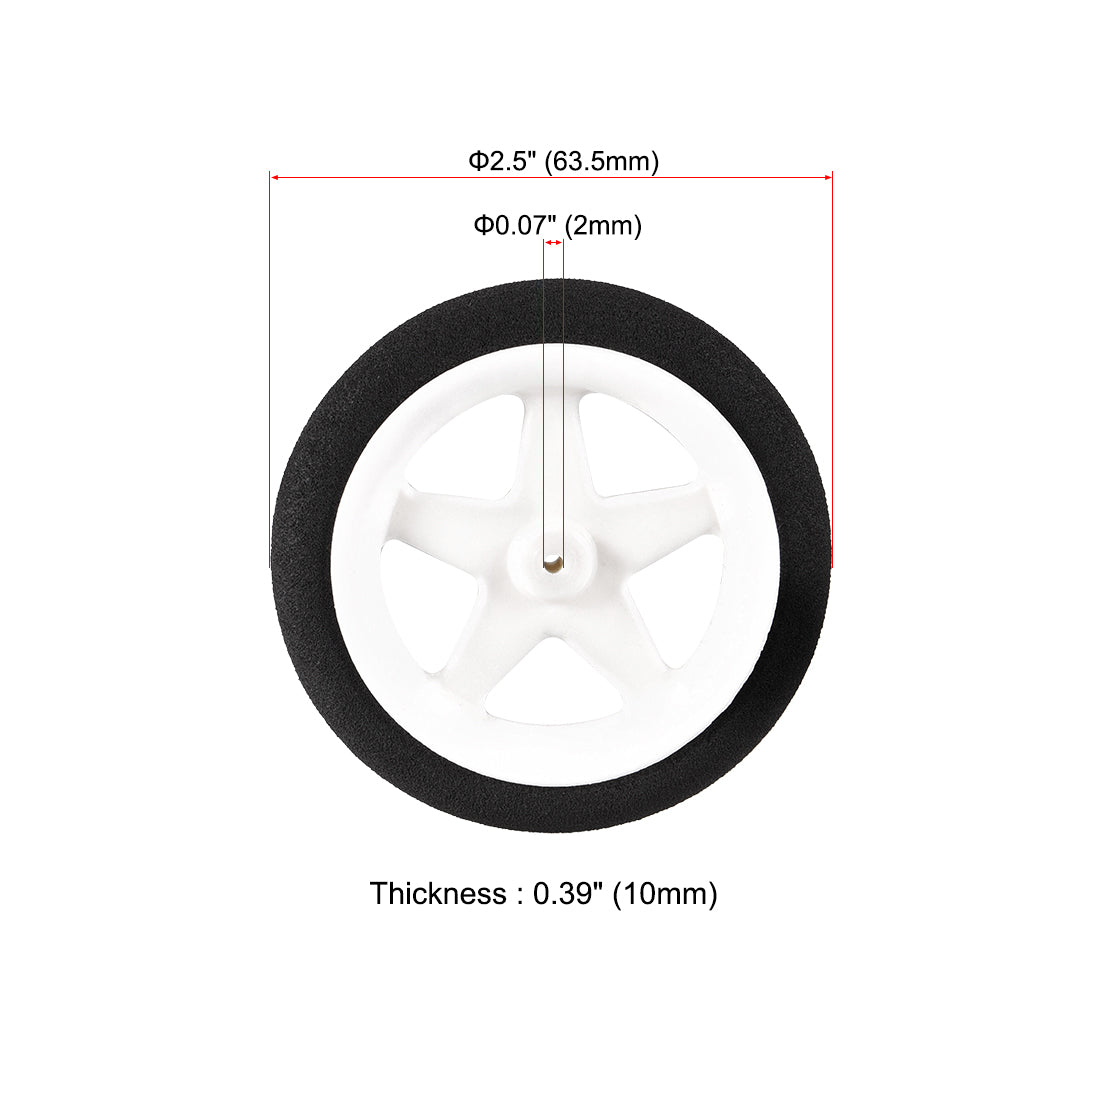 uxcell Uxcell RC Model Plane Aircraft Wheel Micro Sport Wheel 0.07 inch x 2.5 inch -   Wheel 4PCS